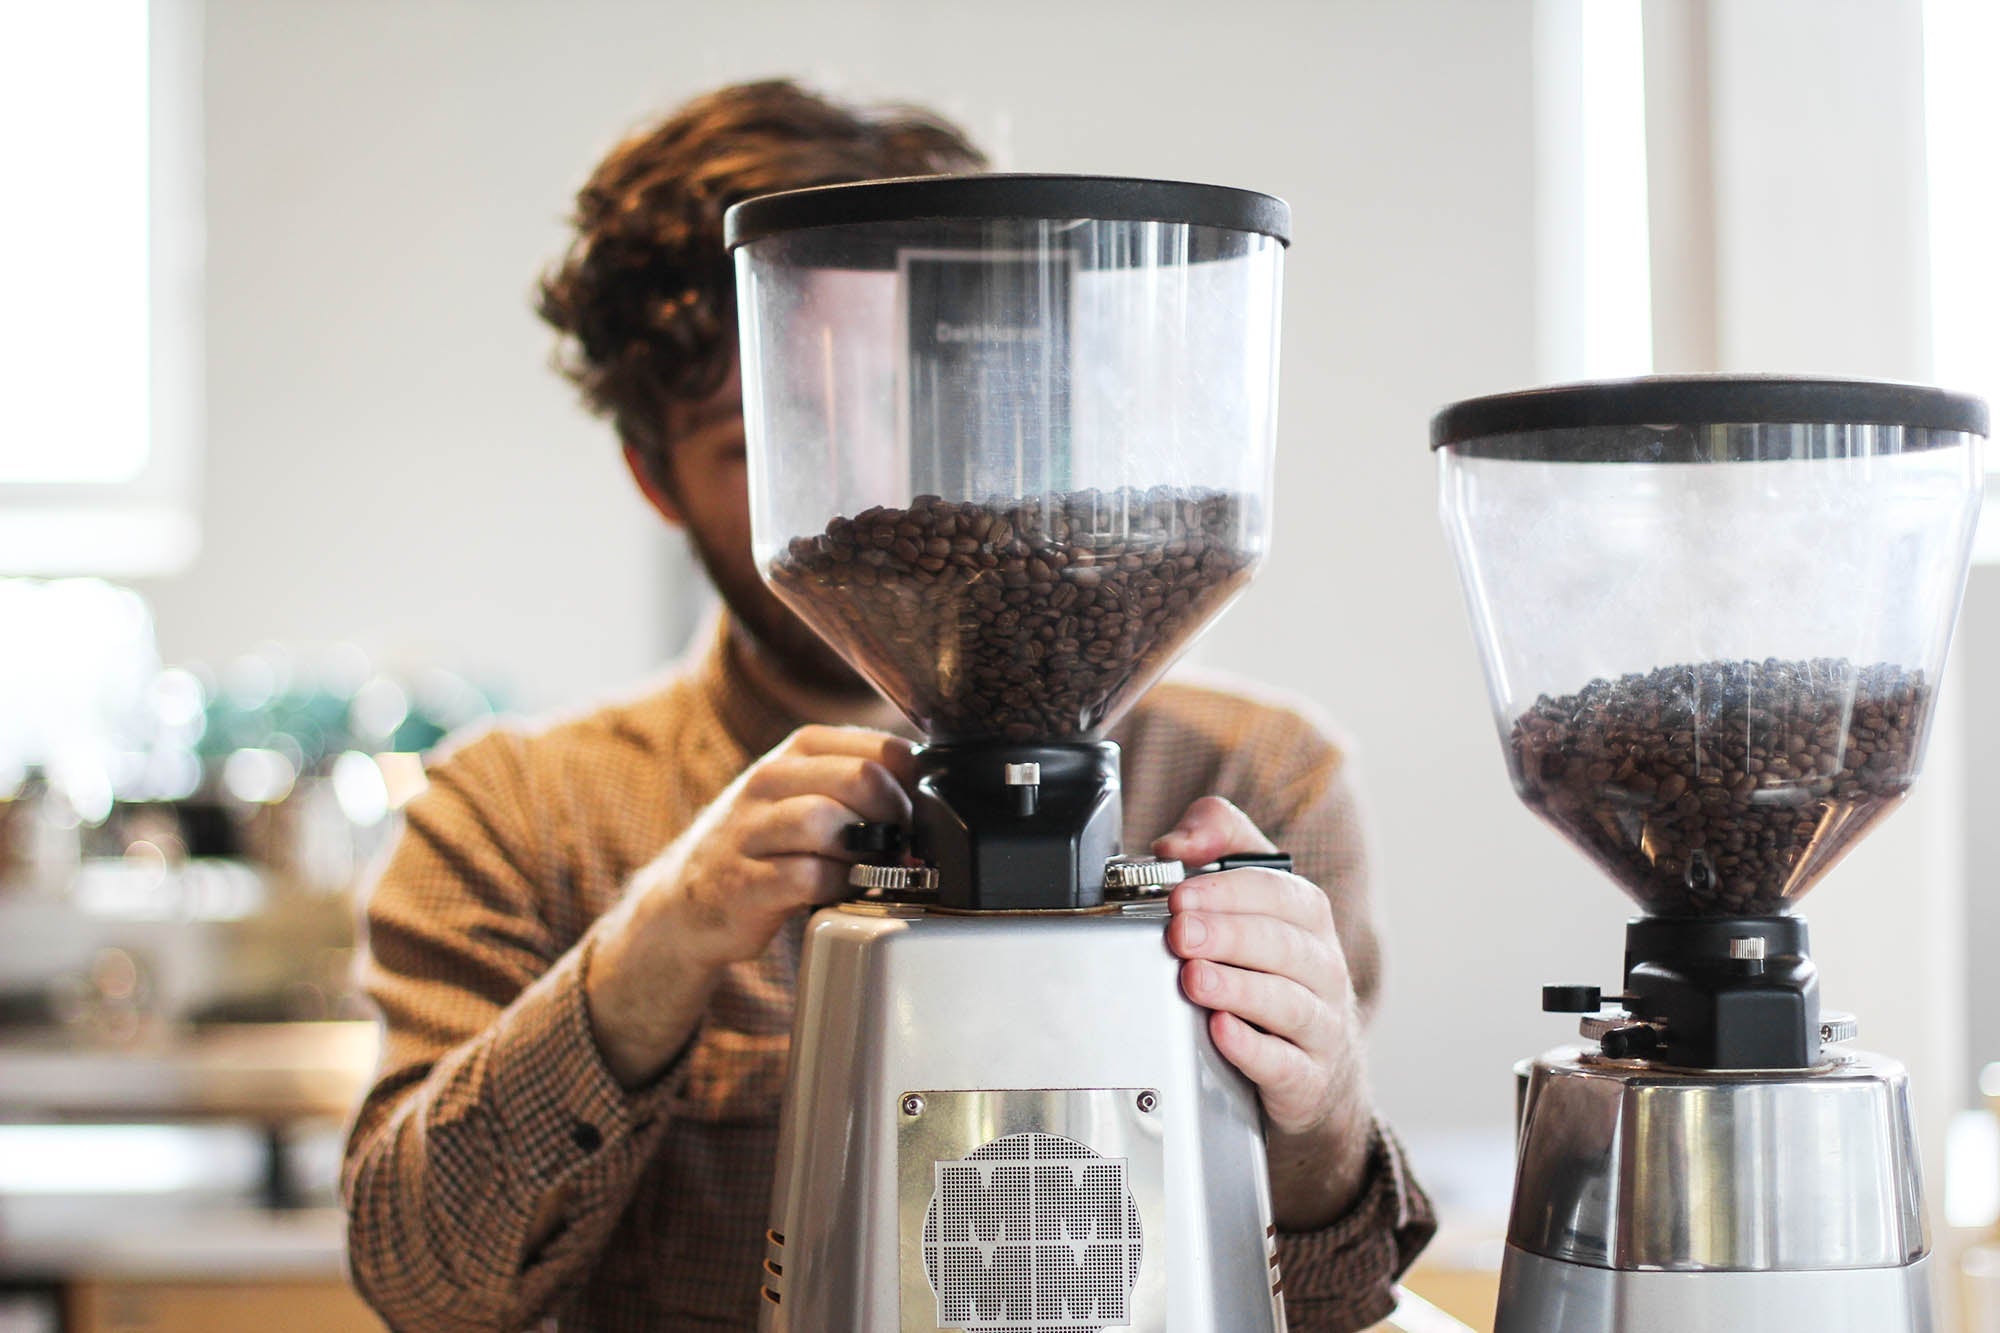 What to Do When Your Espresso Grinder is Jammed